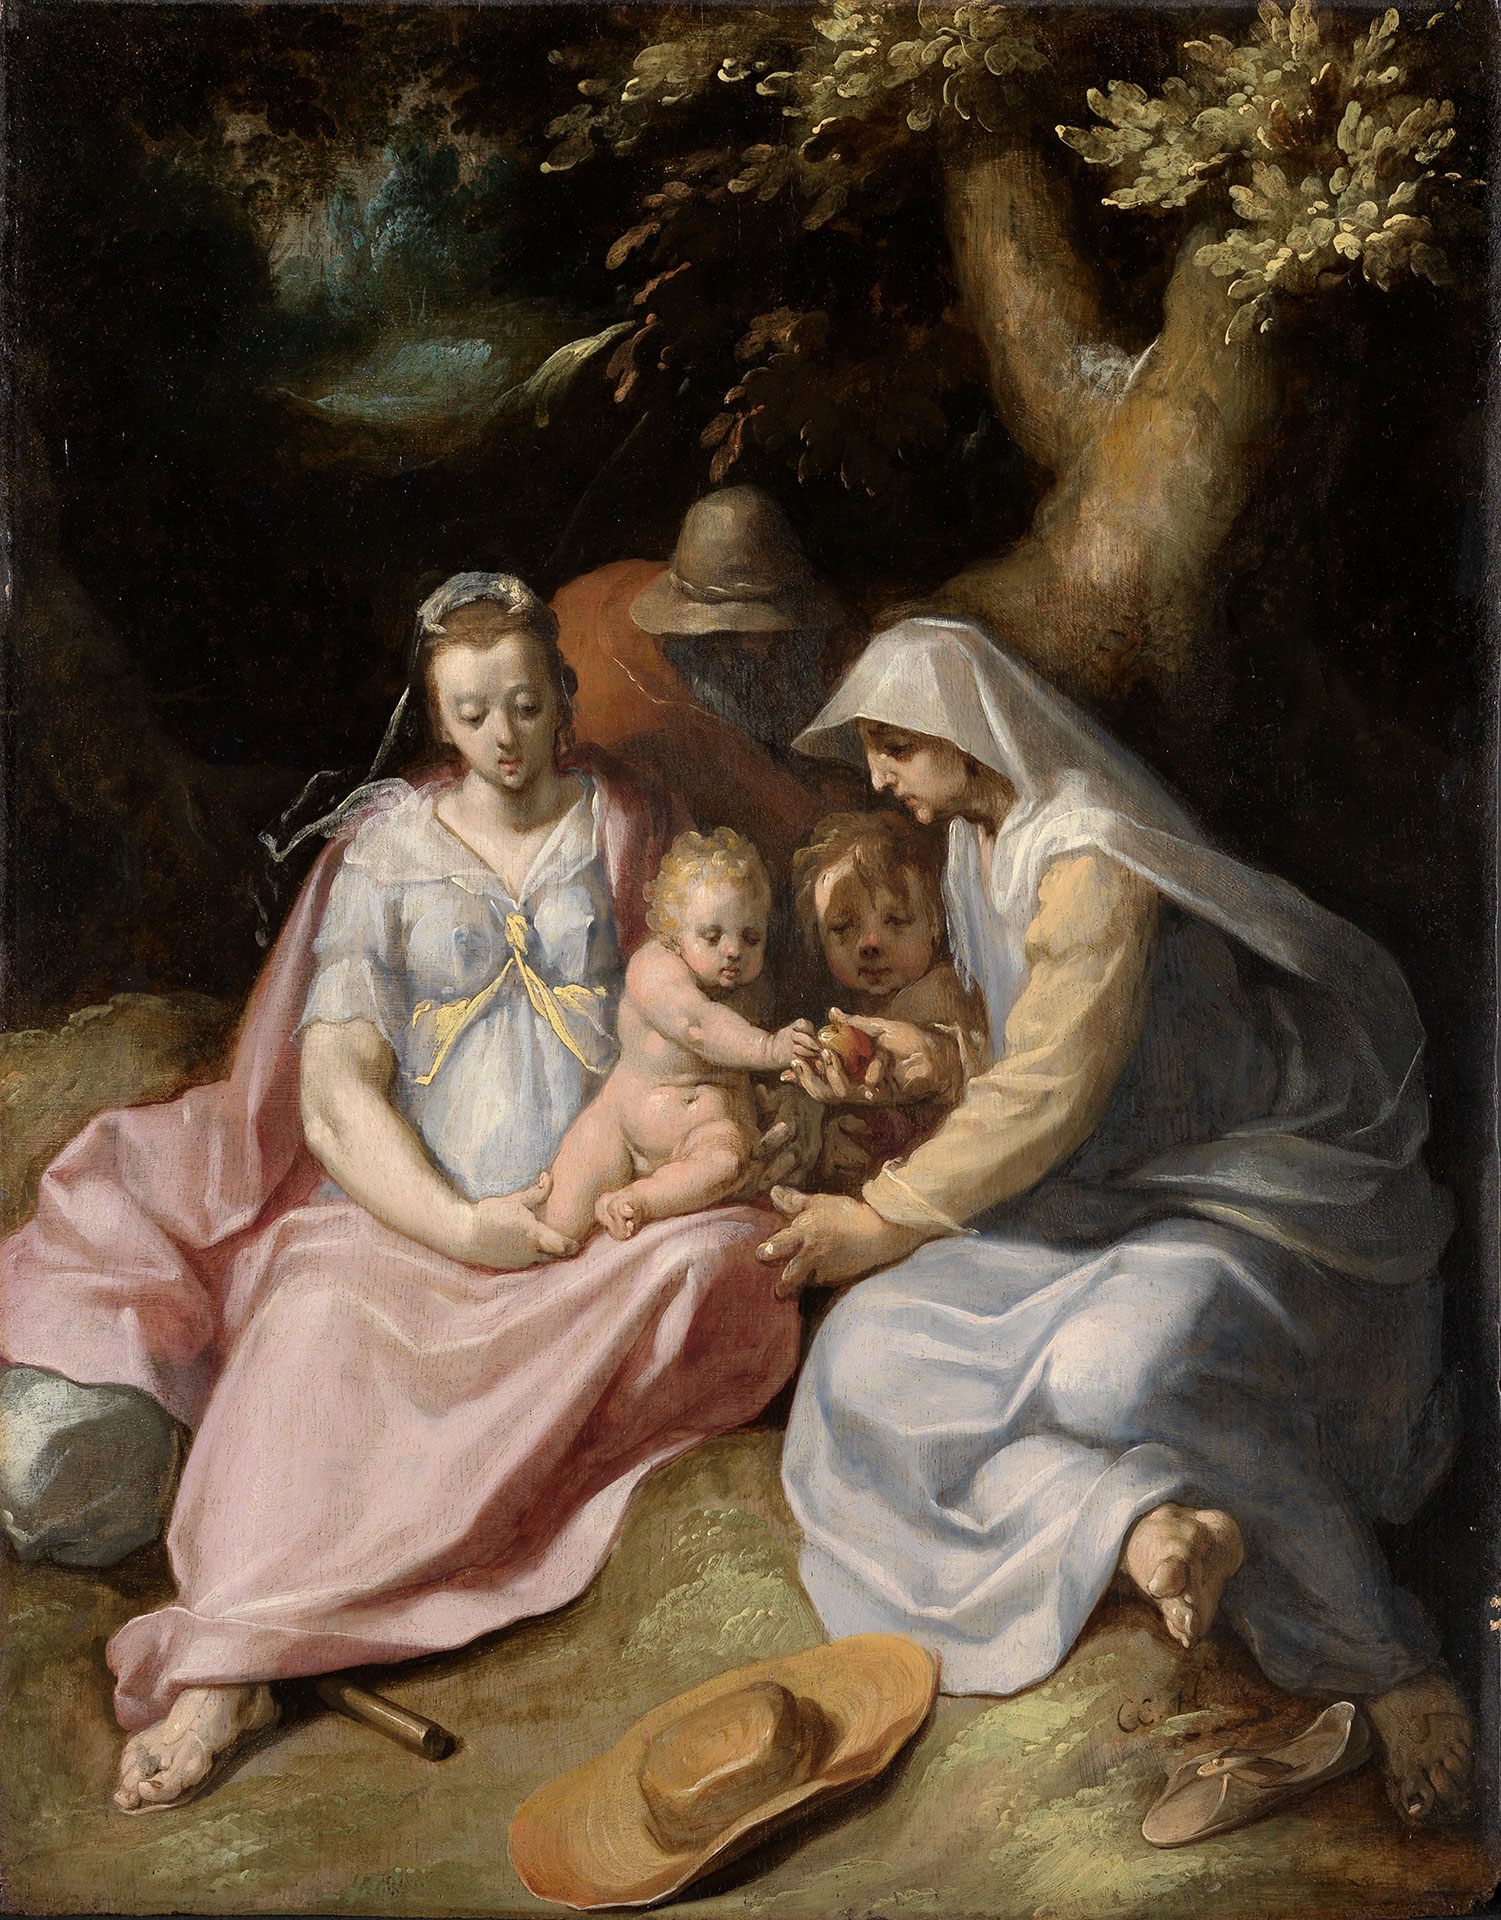 Illustration of the artwork "The Holy Family with Saint Elizabeth and the Boy John in the Forest" by Cornelis Cornelisz. van Haarlem, created around 1589. Mary and Joseph lie in front of a tree and hold the baby Jesus in their arms. She is wearing a light blue dress and is distributing The artwork is located in the Staatliche Kunsthalle Karlsruhe.